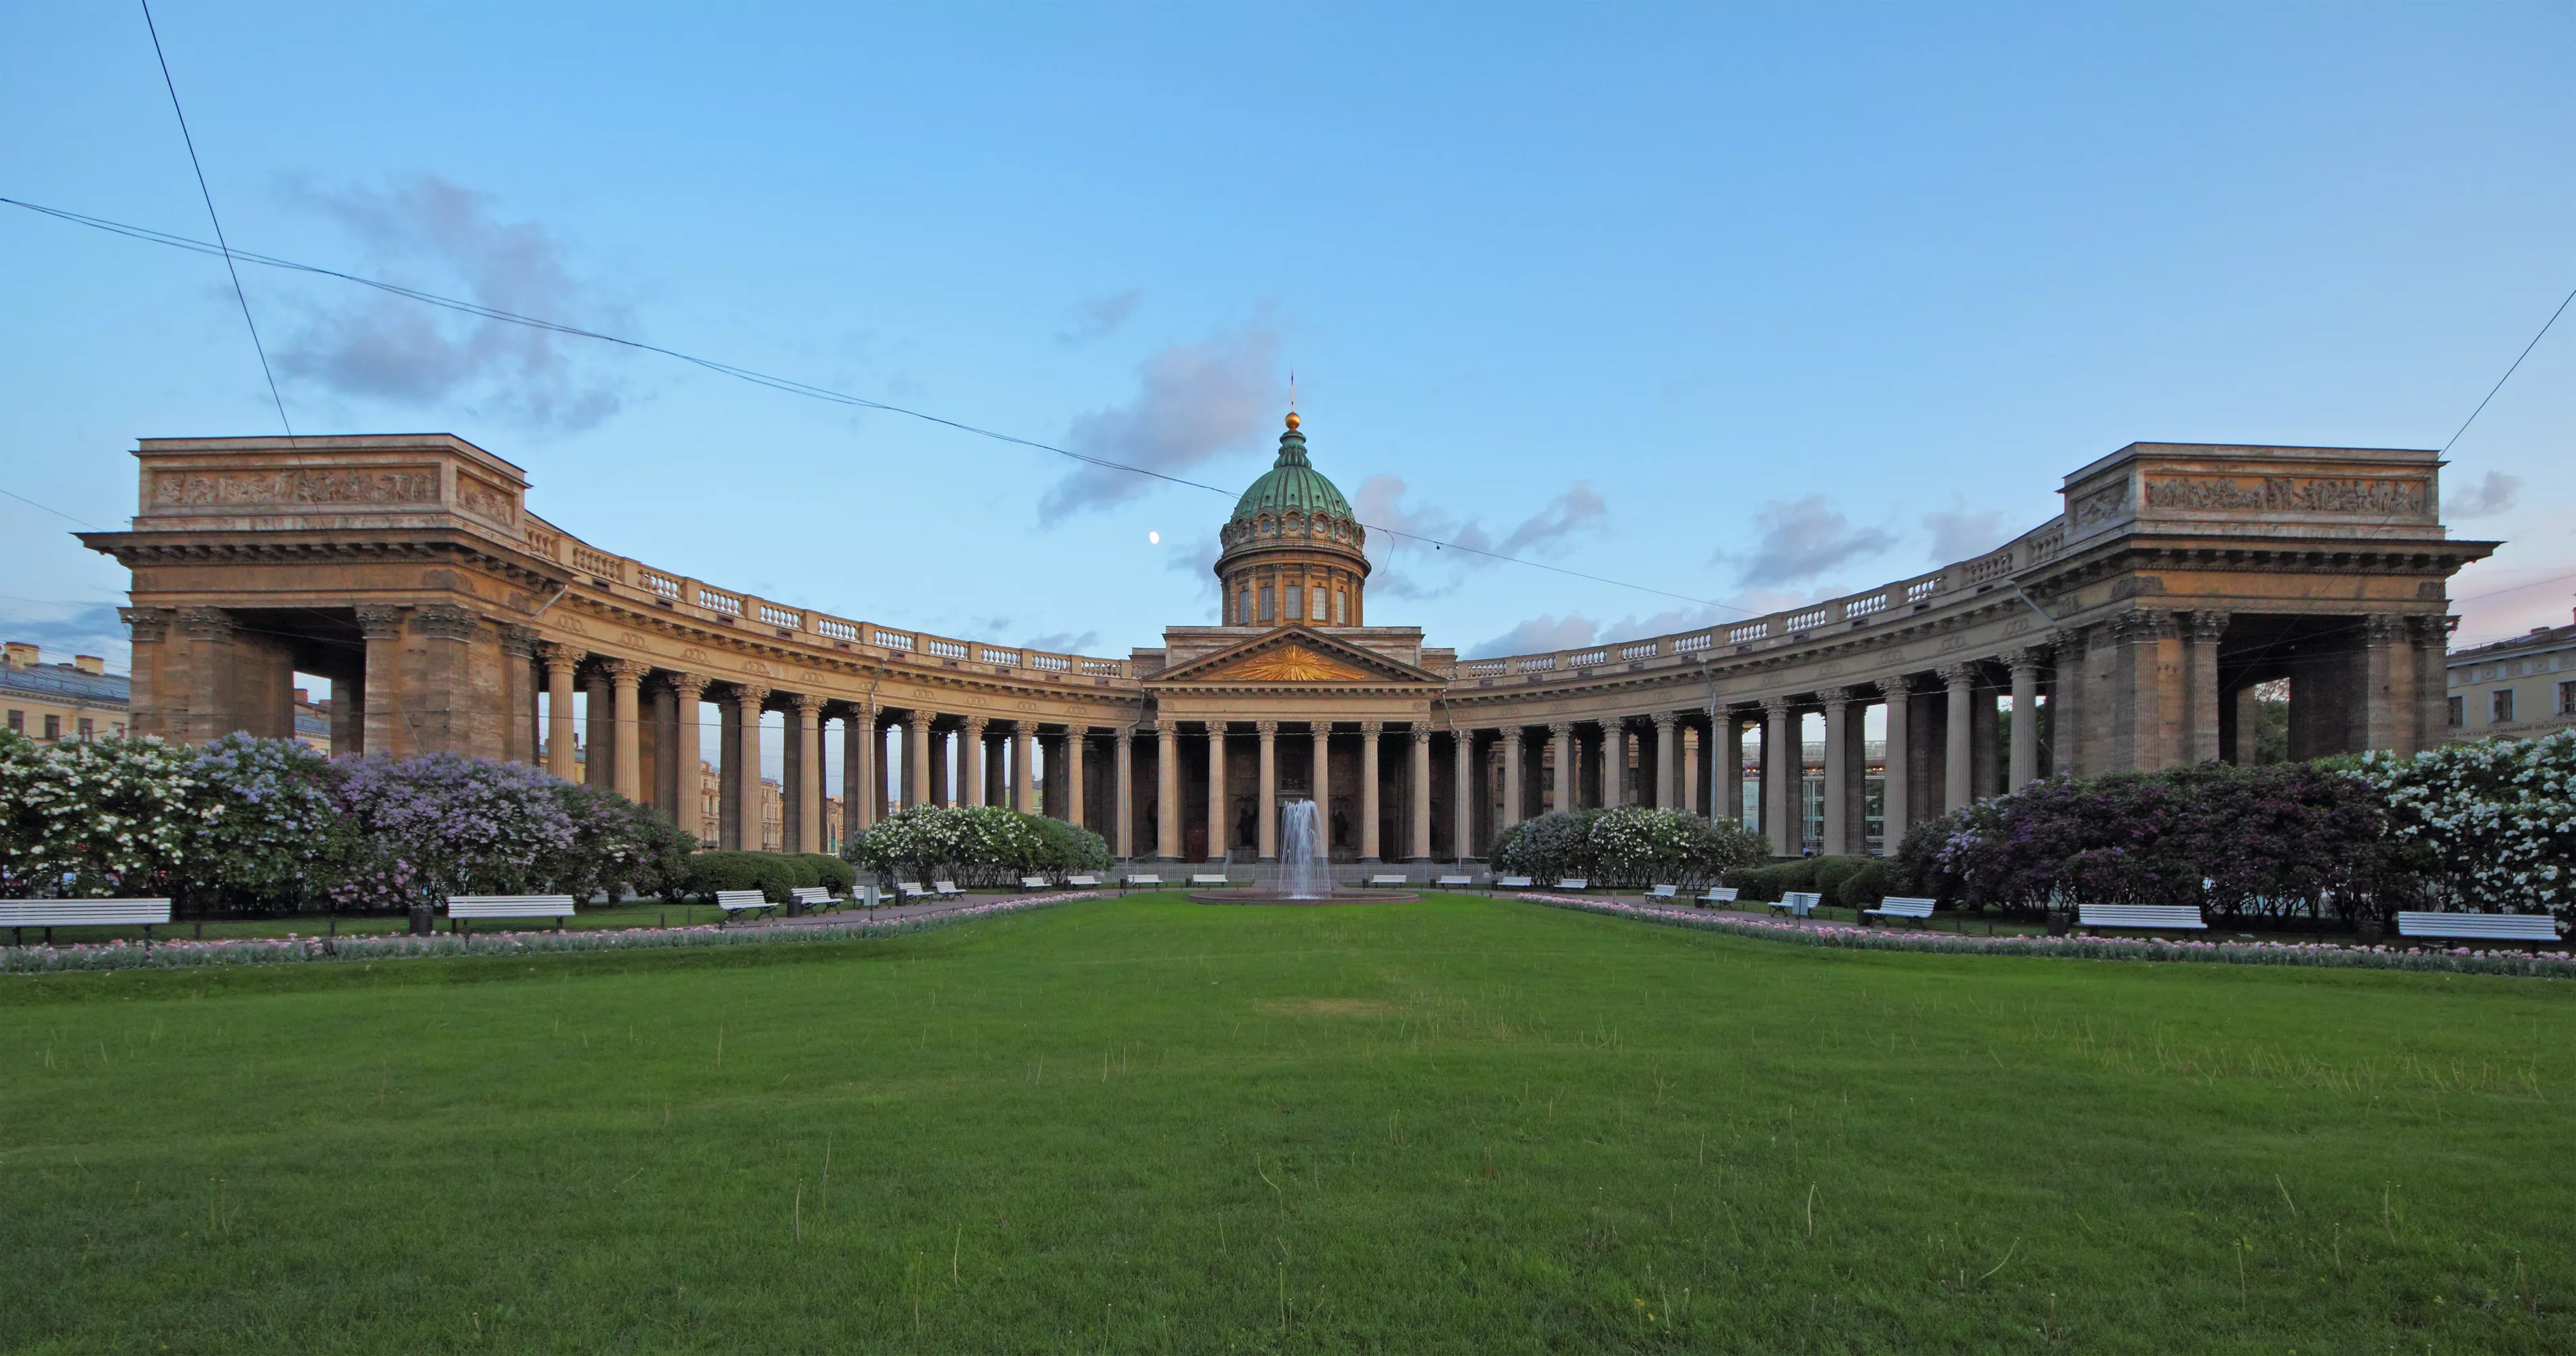 Kazan Cathedral in Russia, Europe | Architecture - Rated 4.6